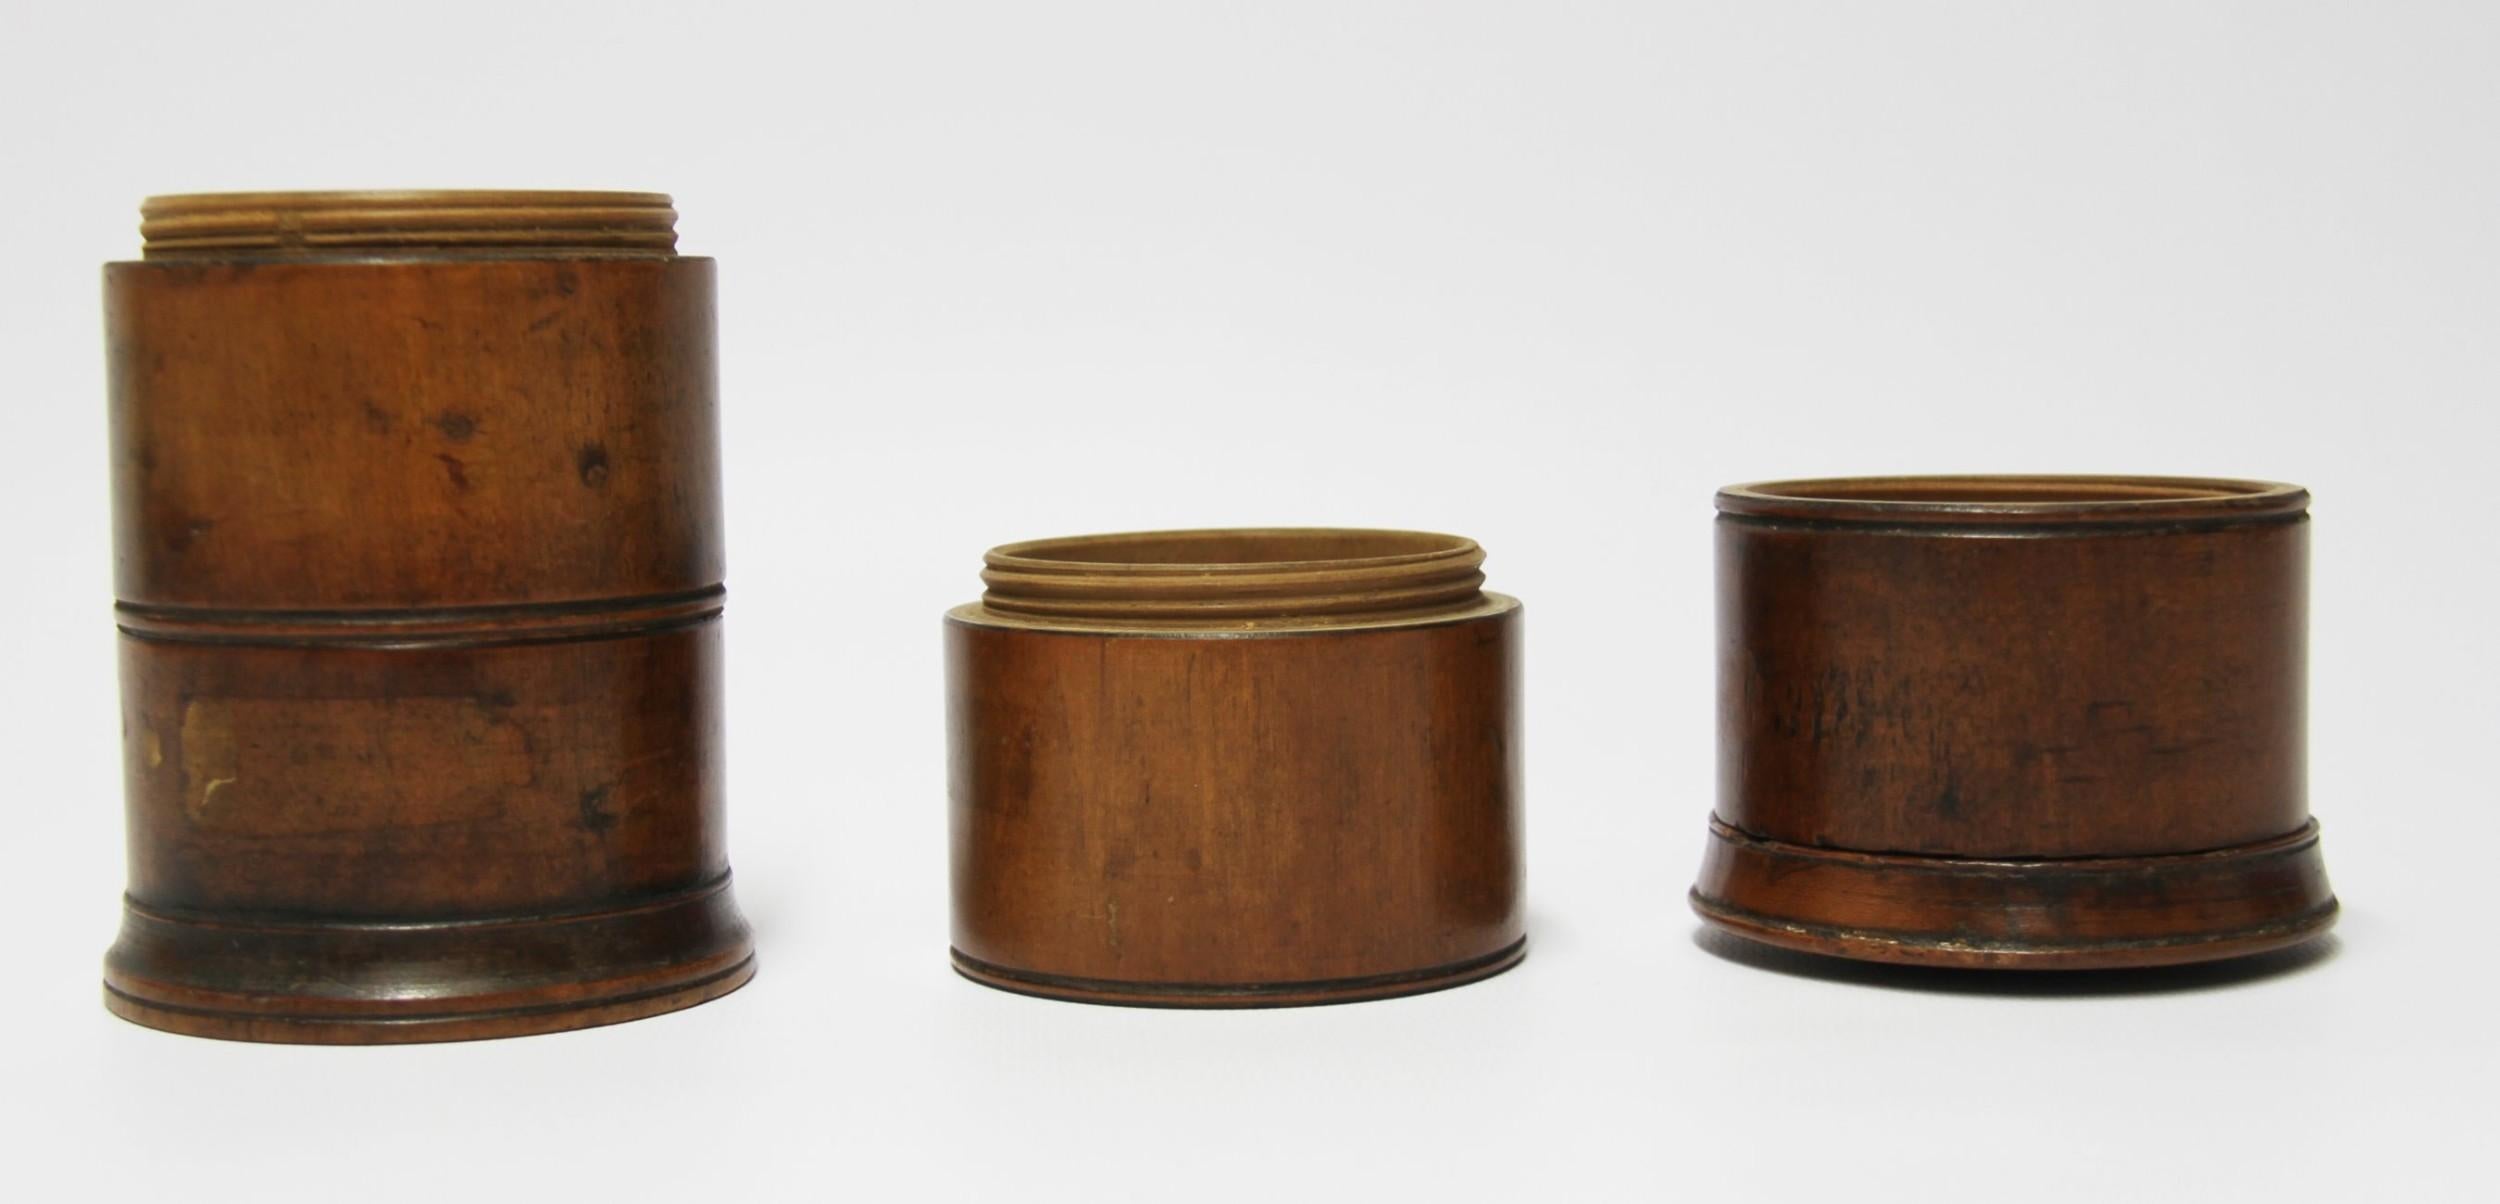 English Antique Early 19th Century Treen Spice Container made from Walnut, circa 1830